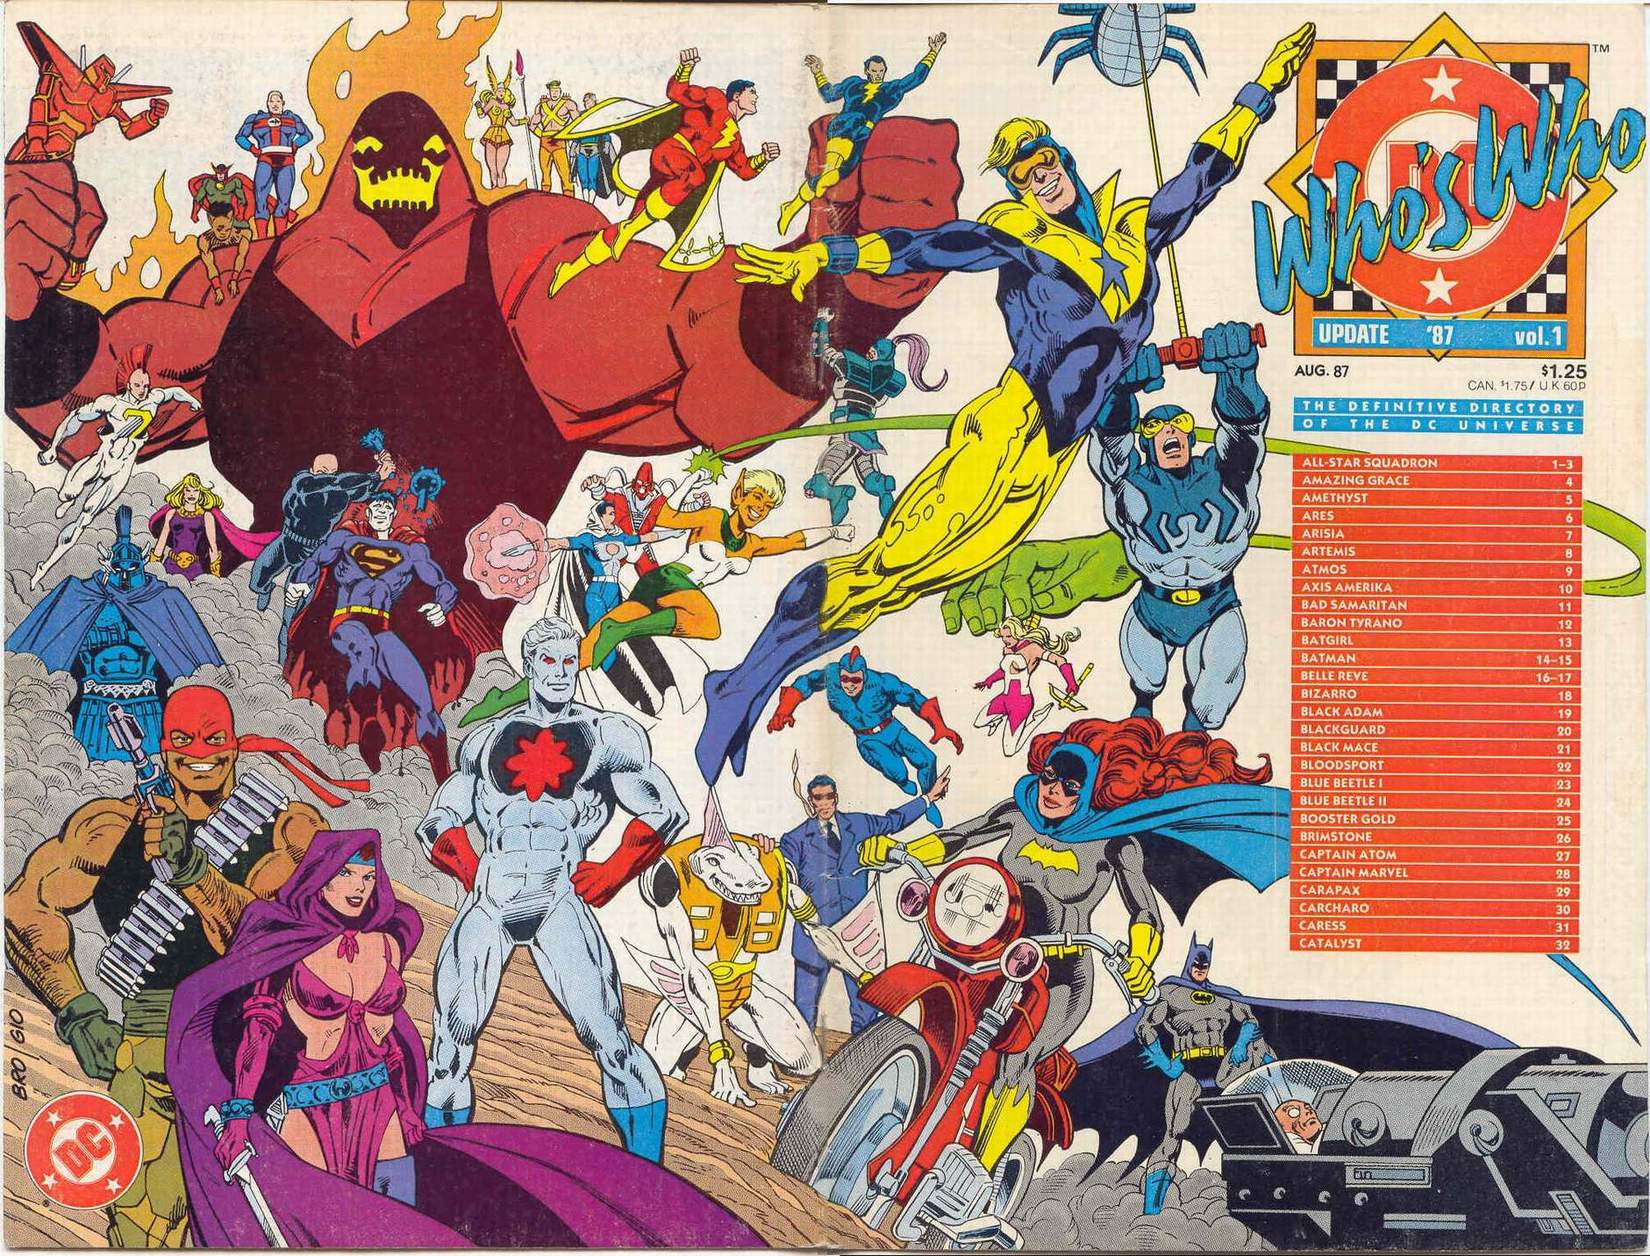 Read online Who's Who: Update '87 comic -  Issue #1 - 2